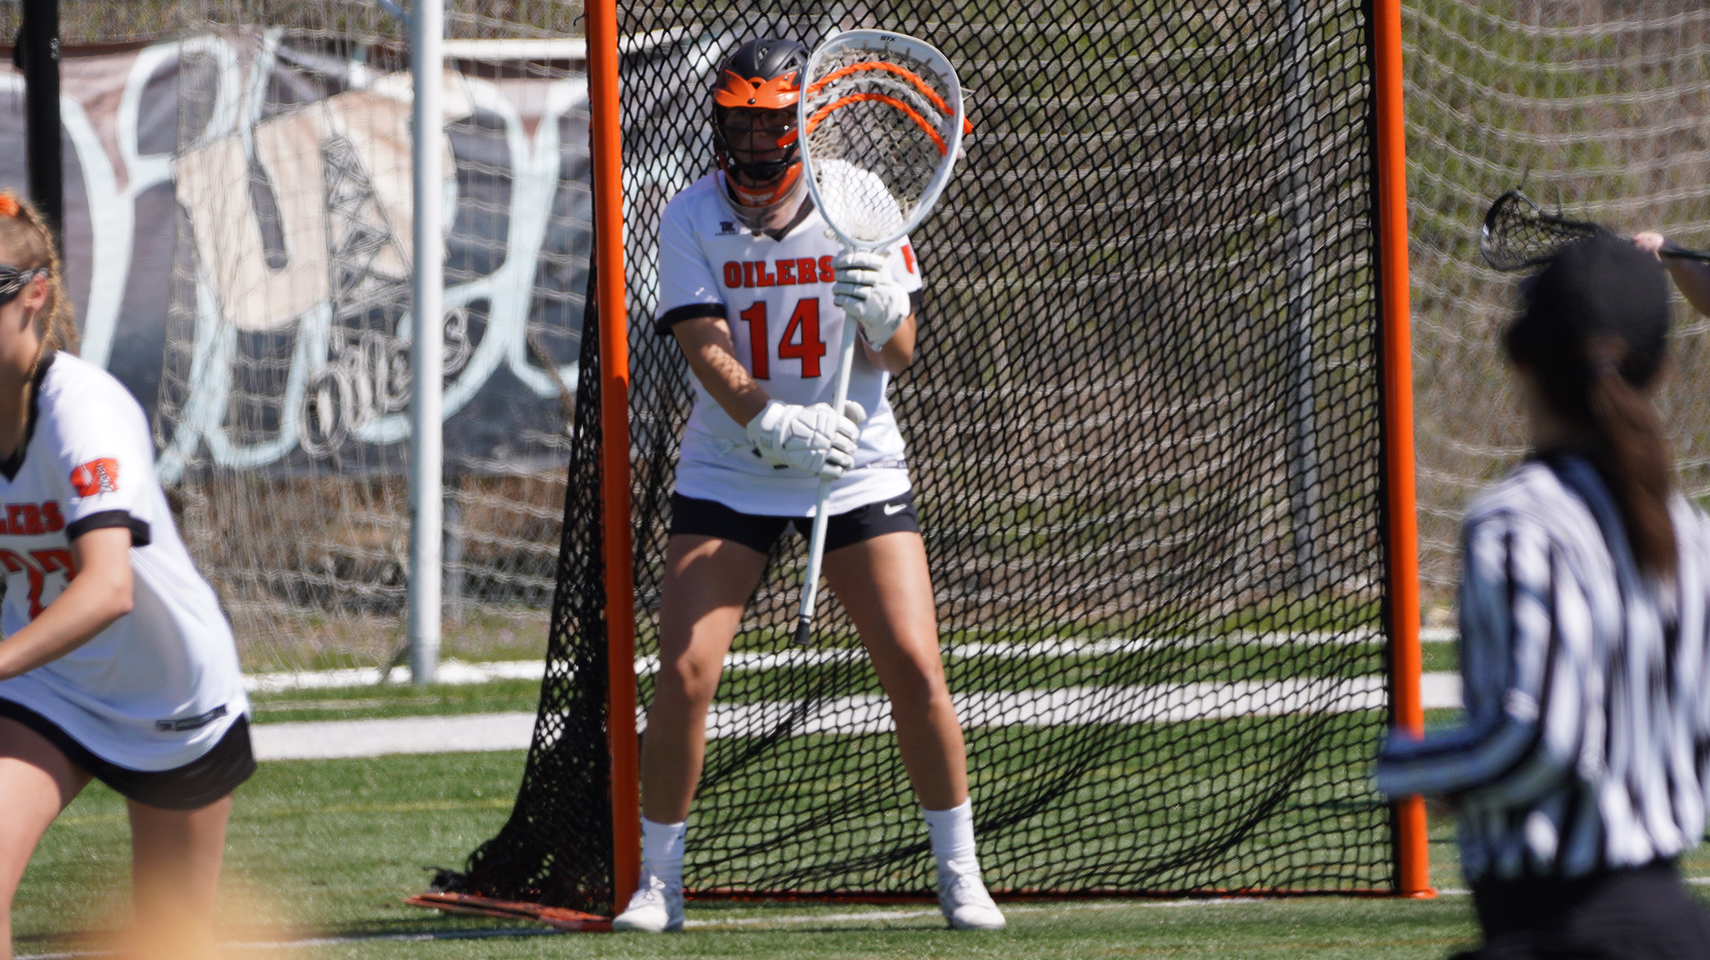 Women's lacrosse goalie standing in front of the net with her stick up